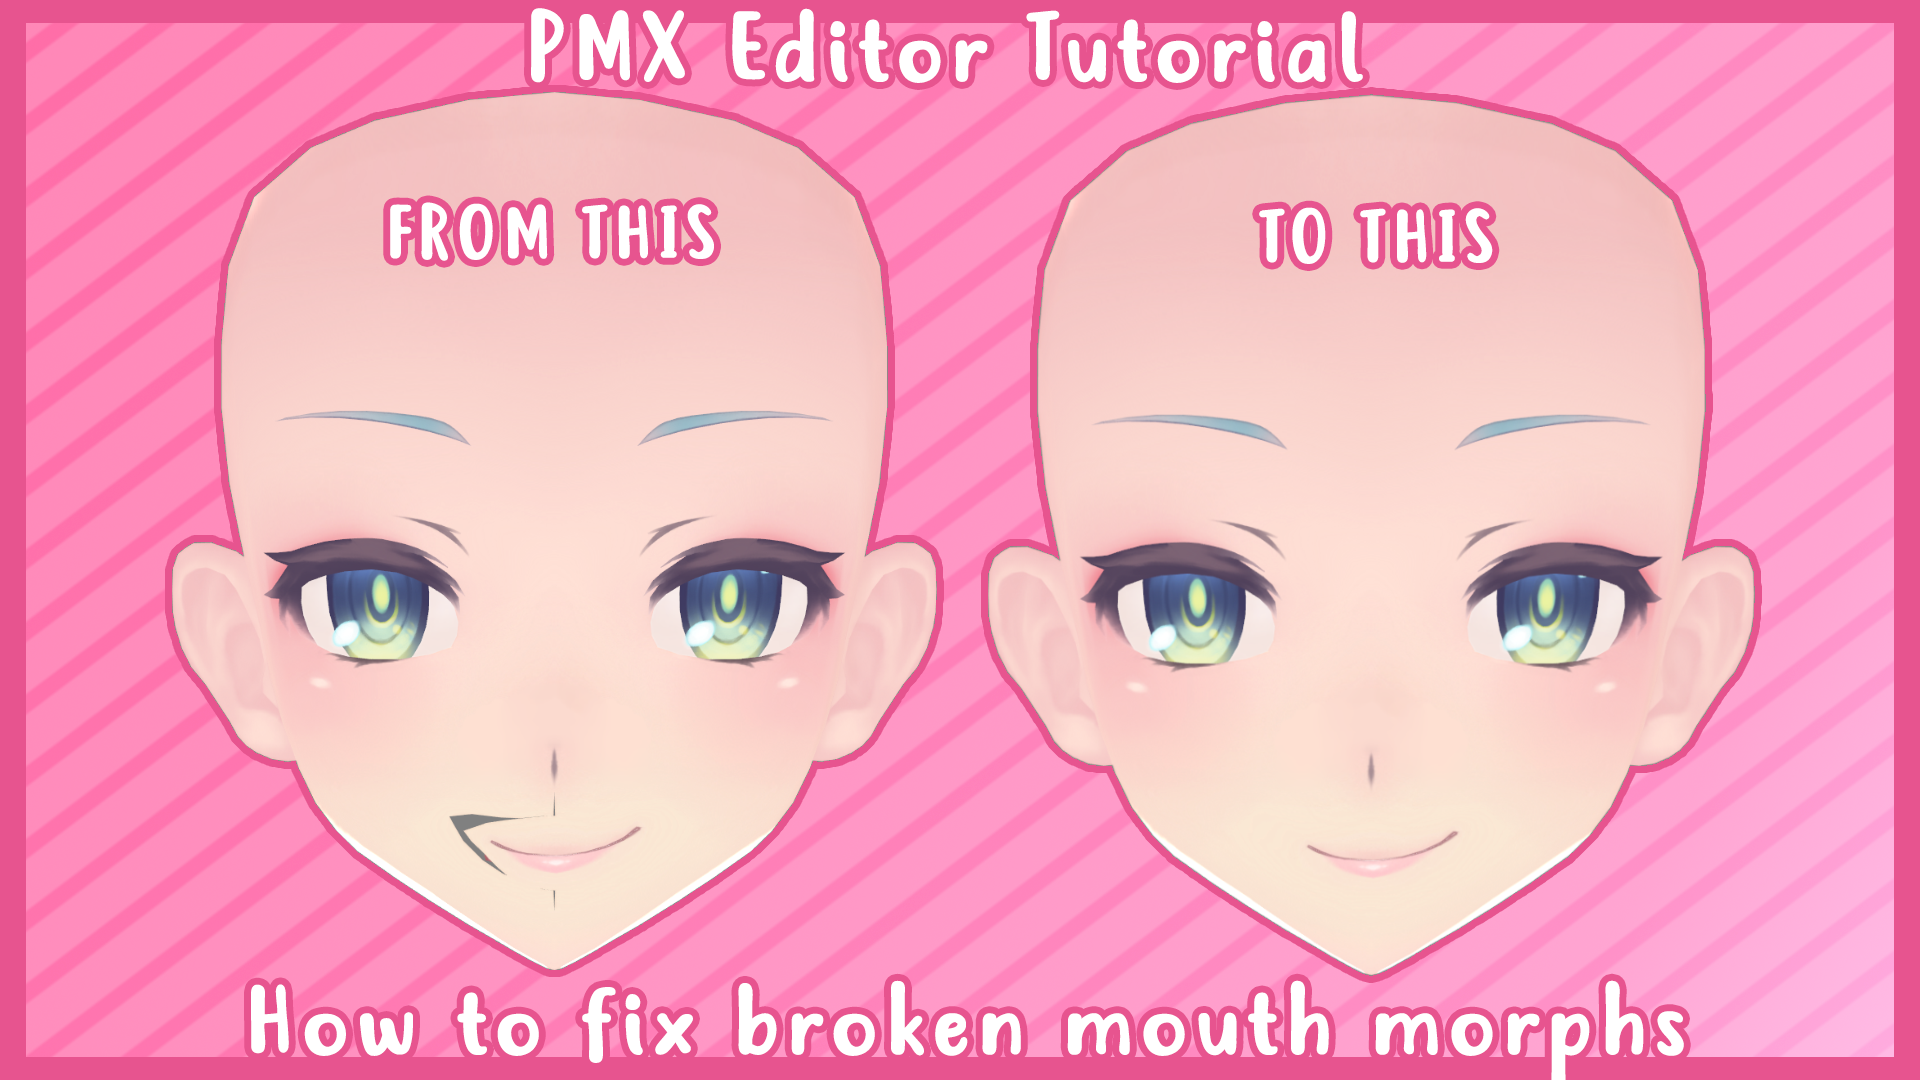 [MMD - PMXE] How to fix broken mouth morphs [Tut] by Astria-MMD on ...